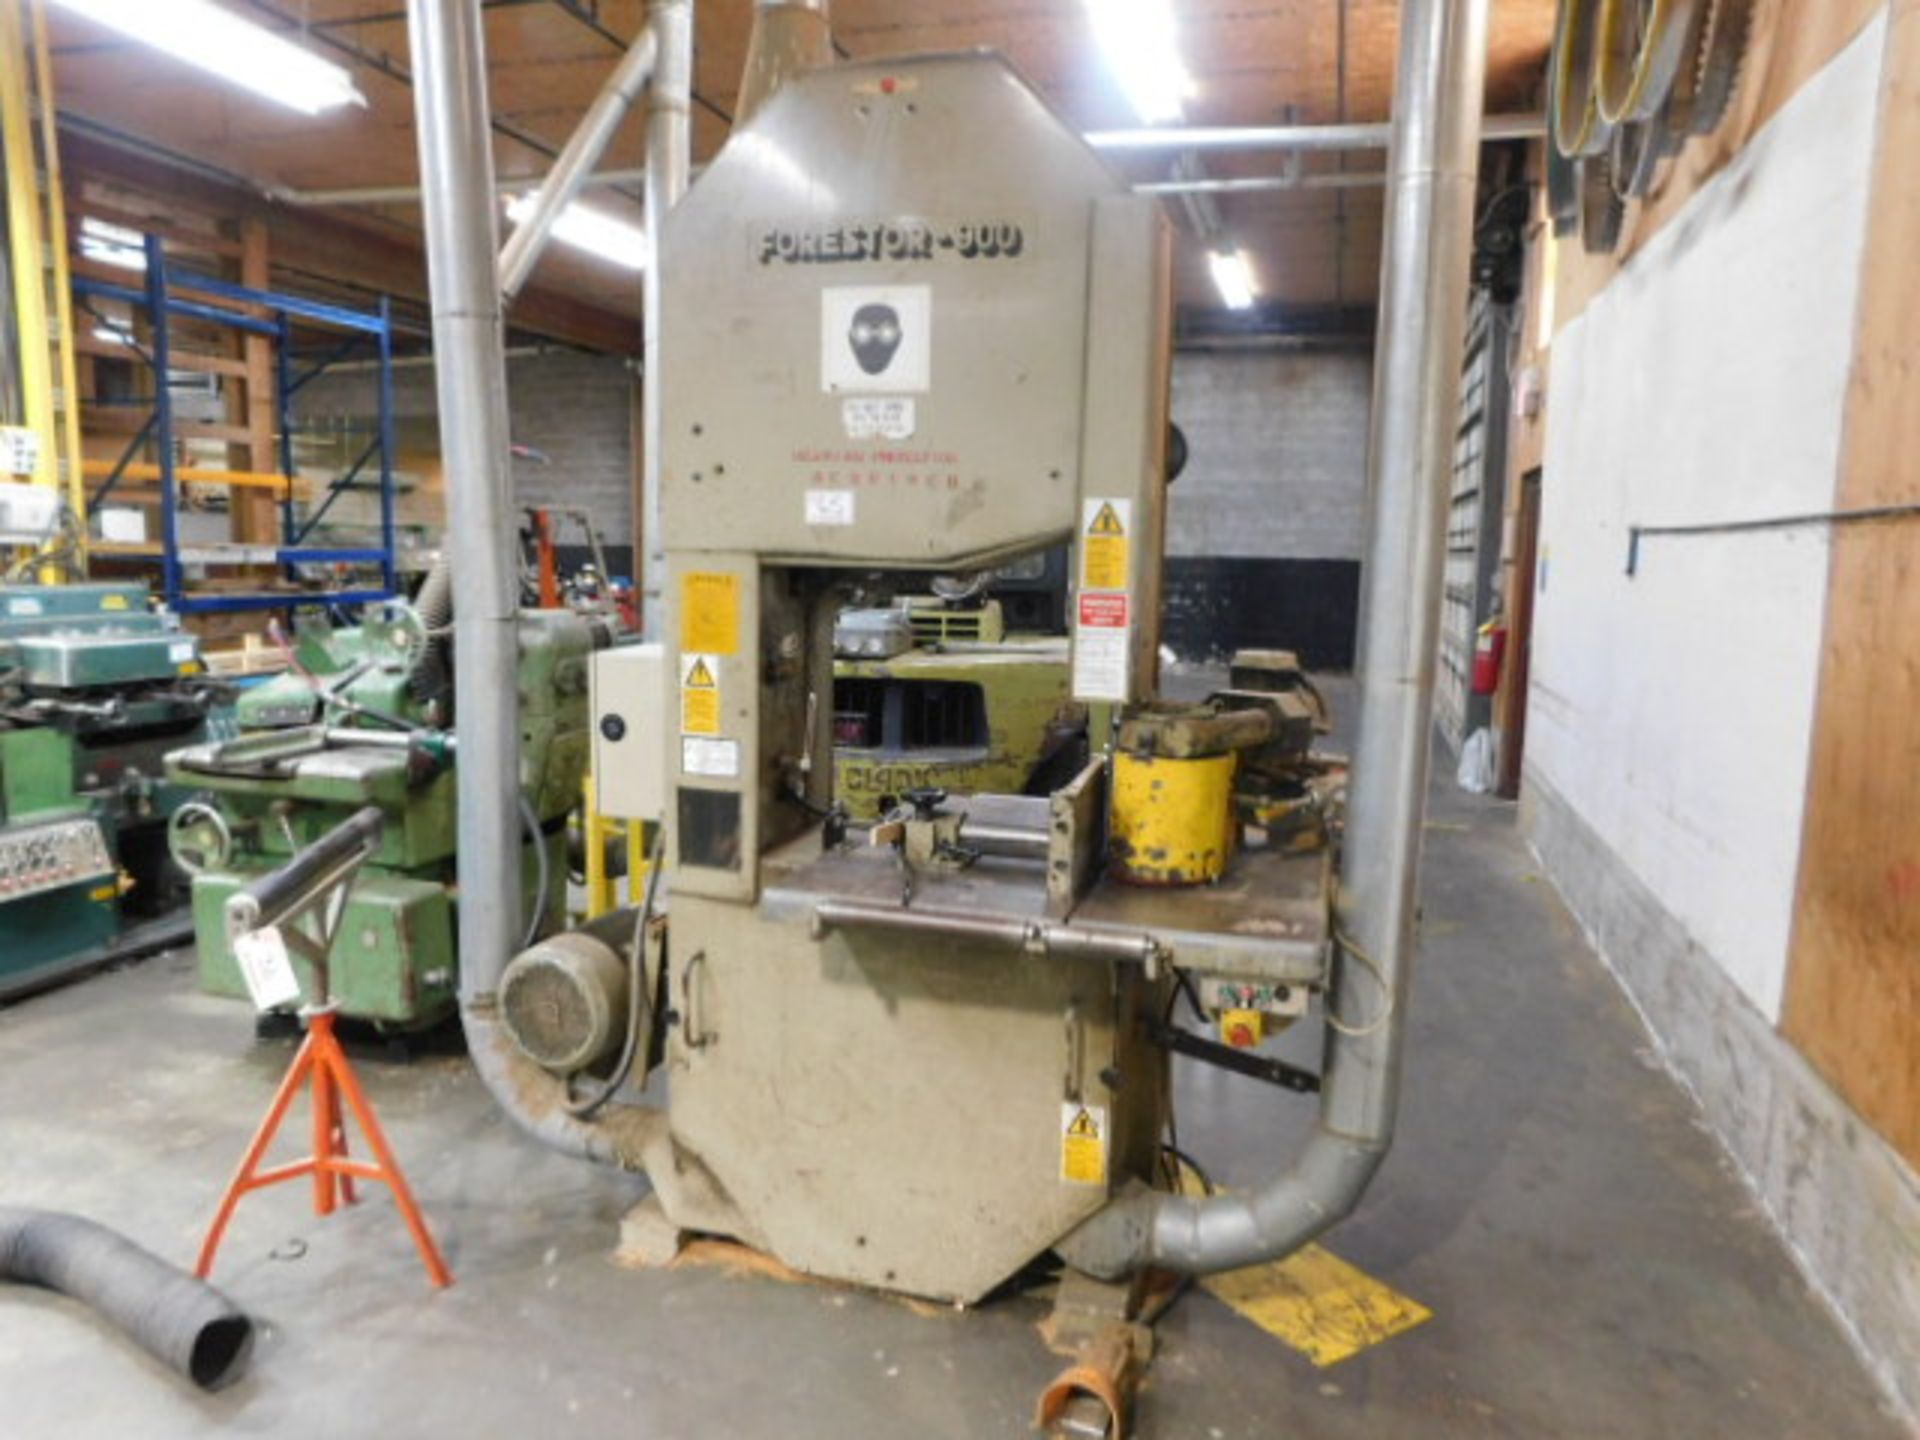 FORESTER 900 VERTICAL BANDSAW, 24” THROAT, 20HP, FEED WORKS, AUTO LUBRICATOR